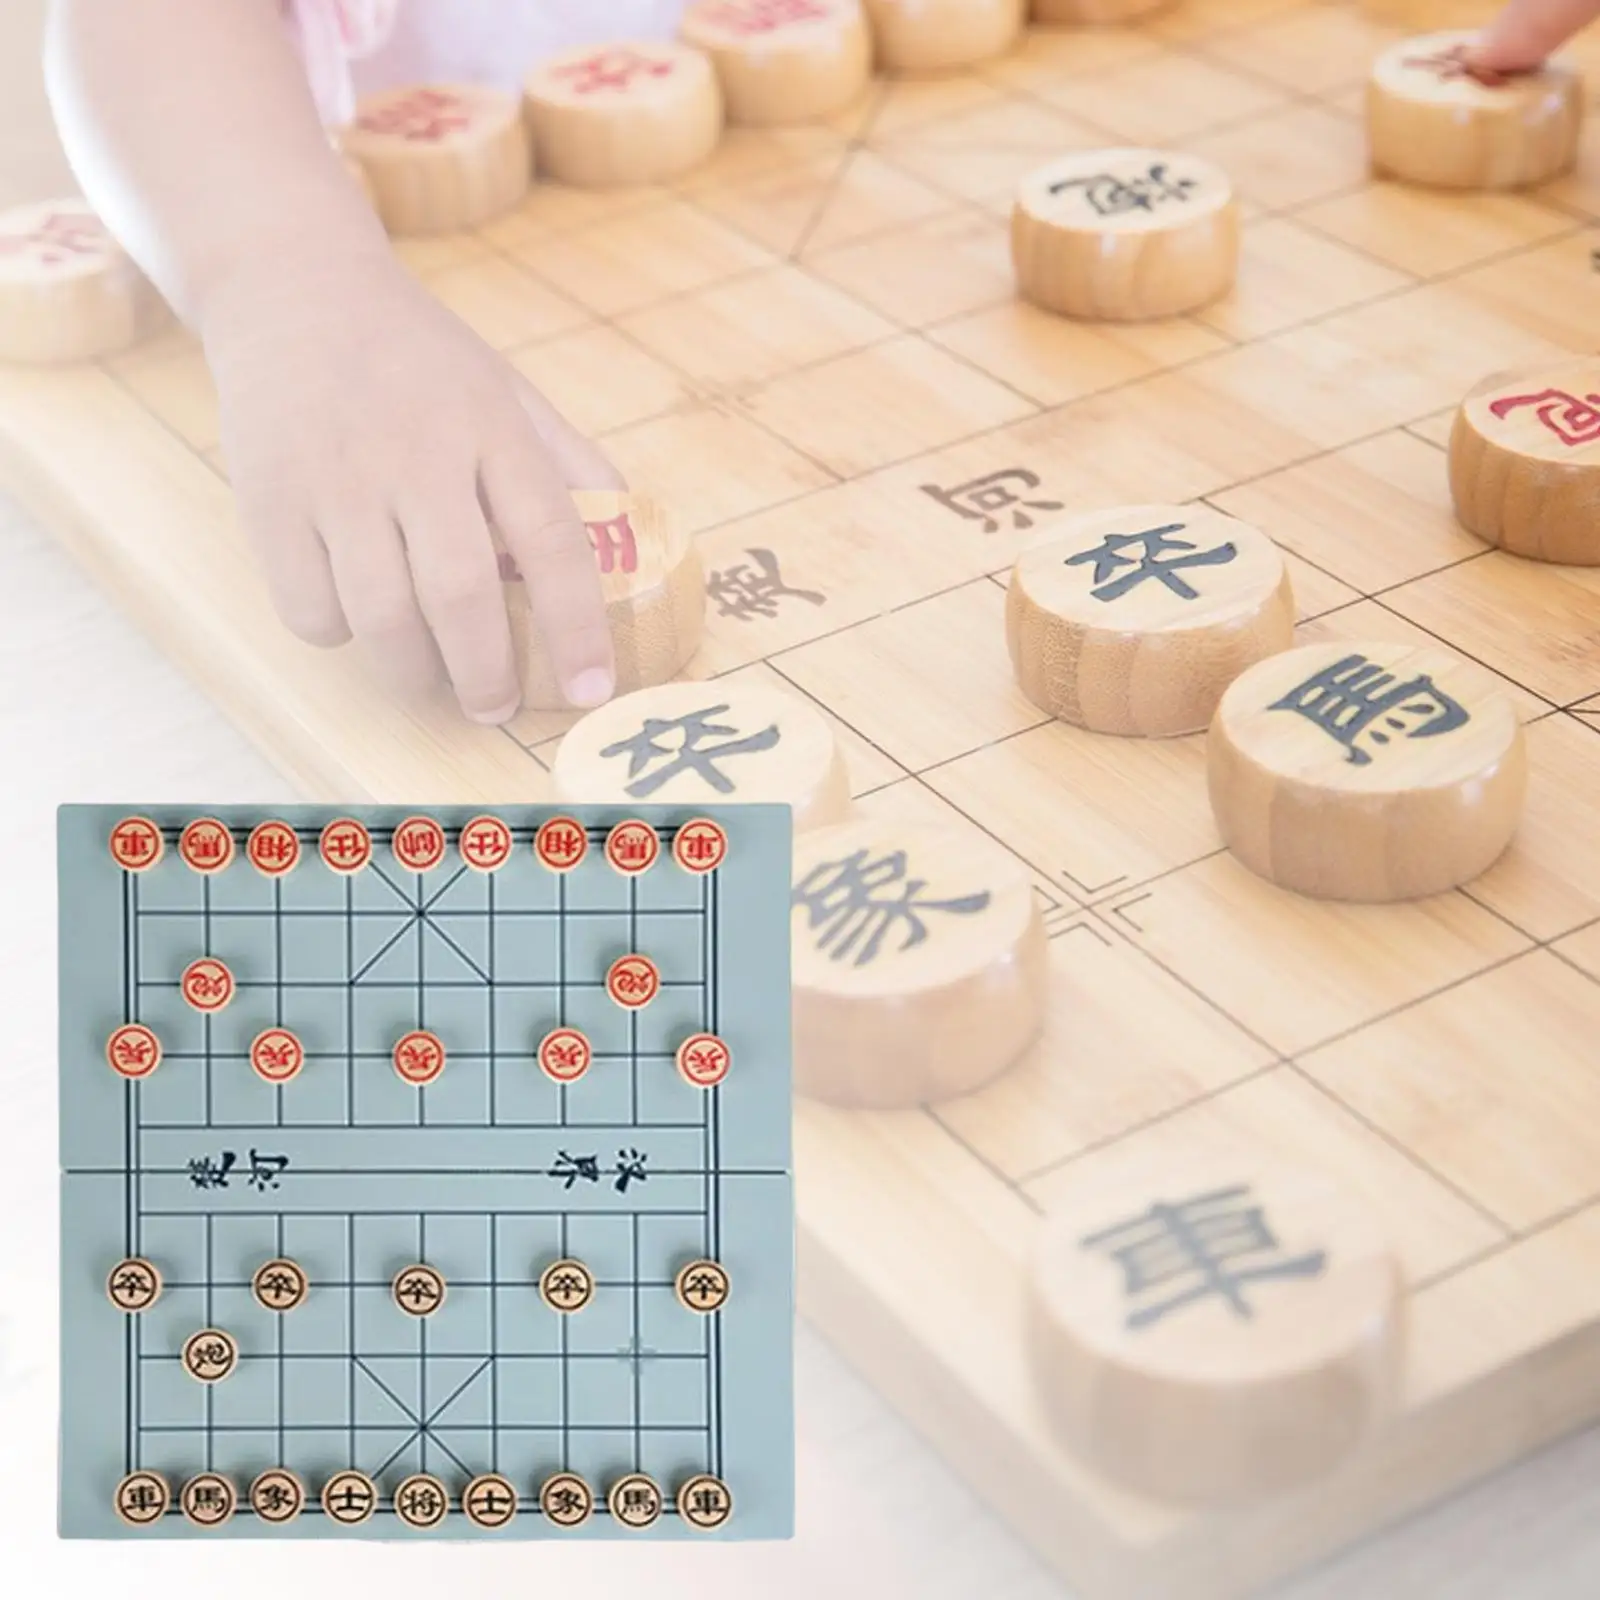 Portable Chinese Chess Set,Entertainment Board Game,Funny Folding China Chess,Xiangqi game for Adults